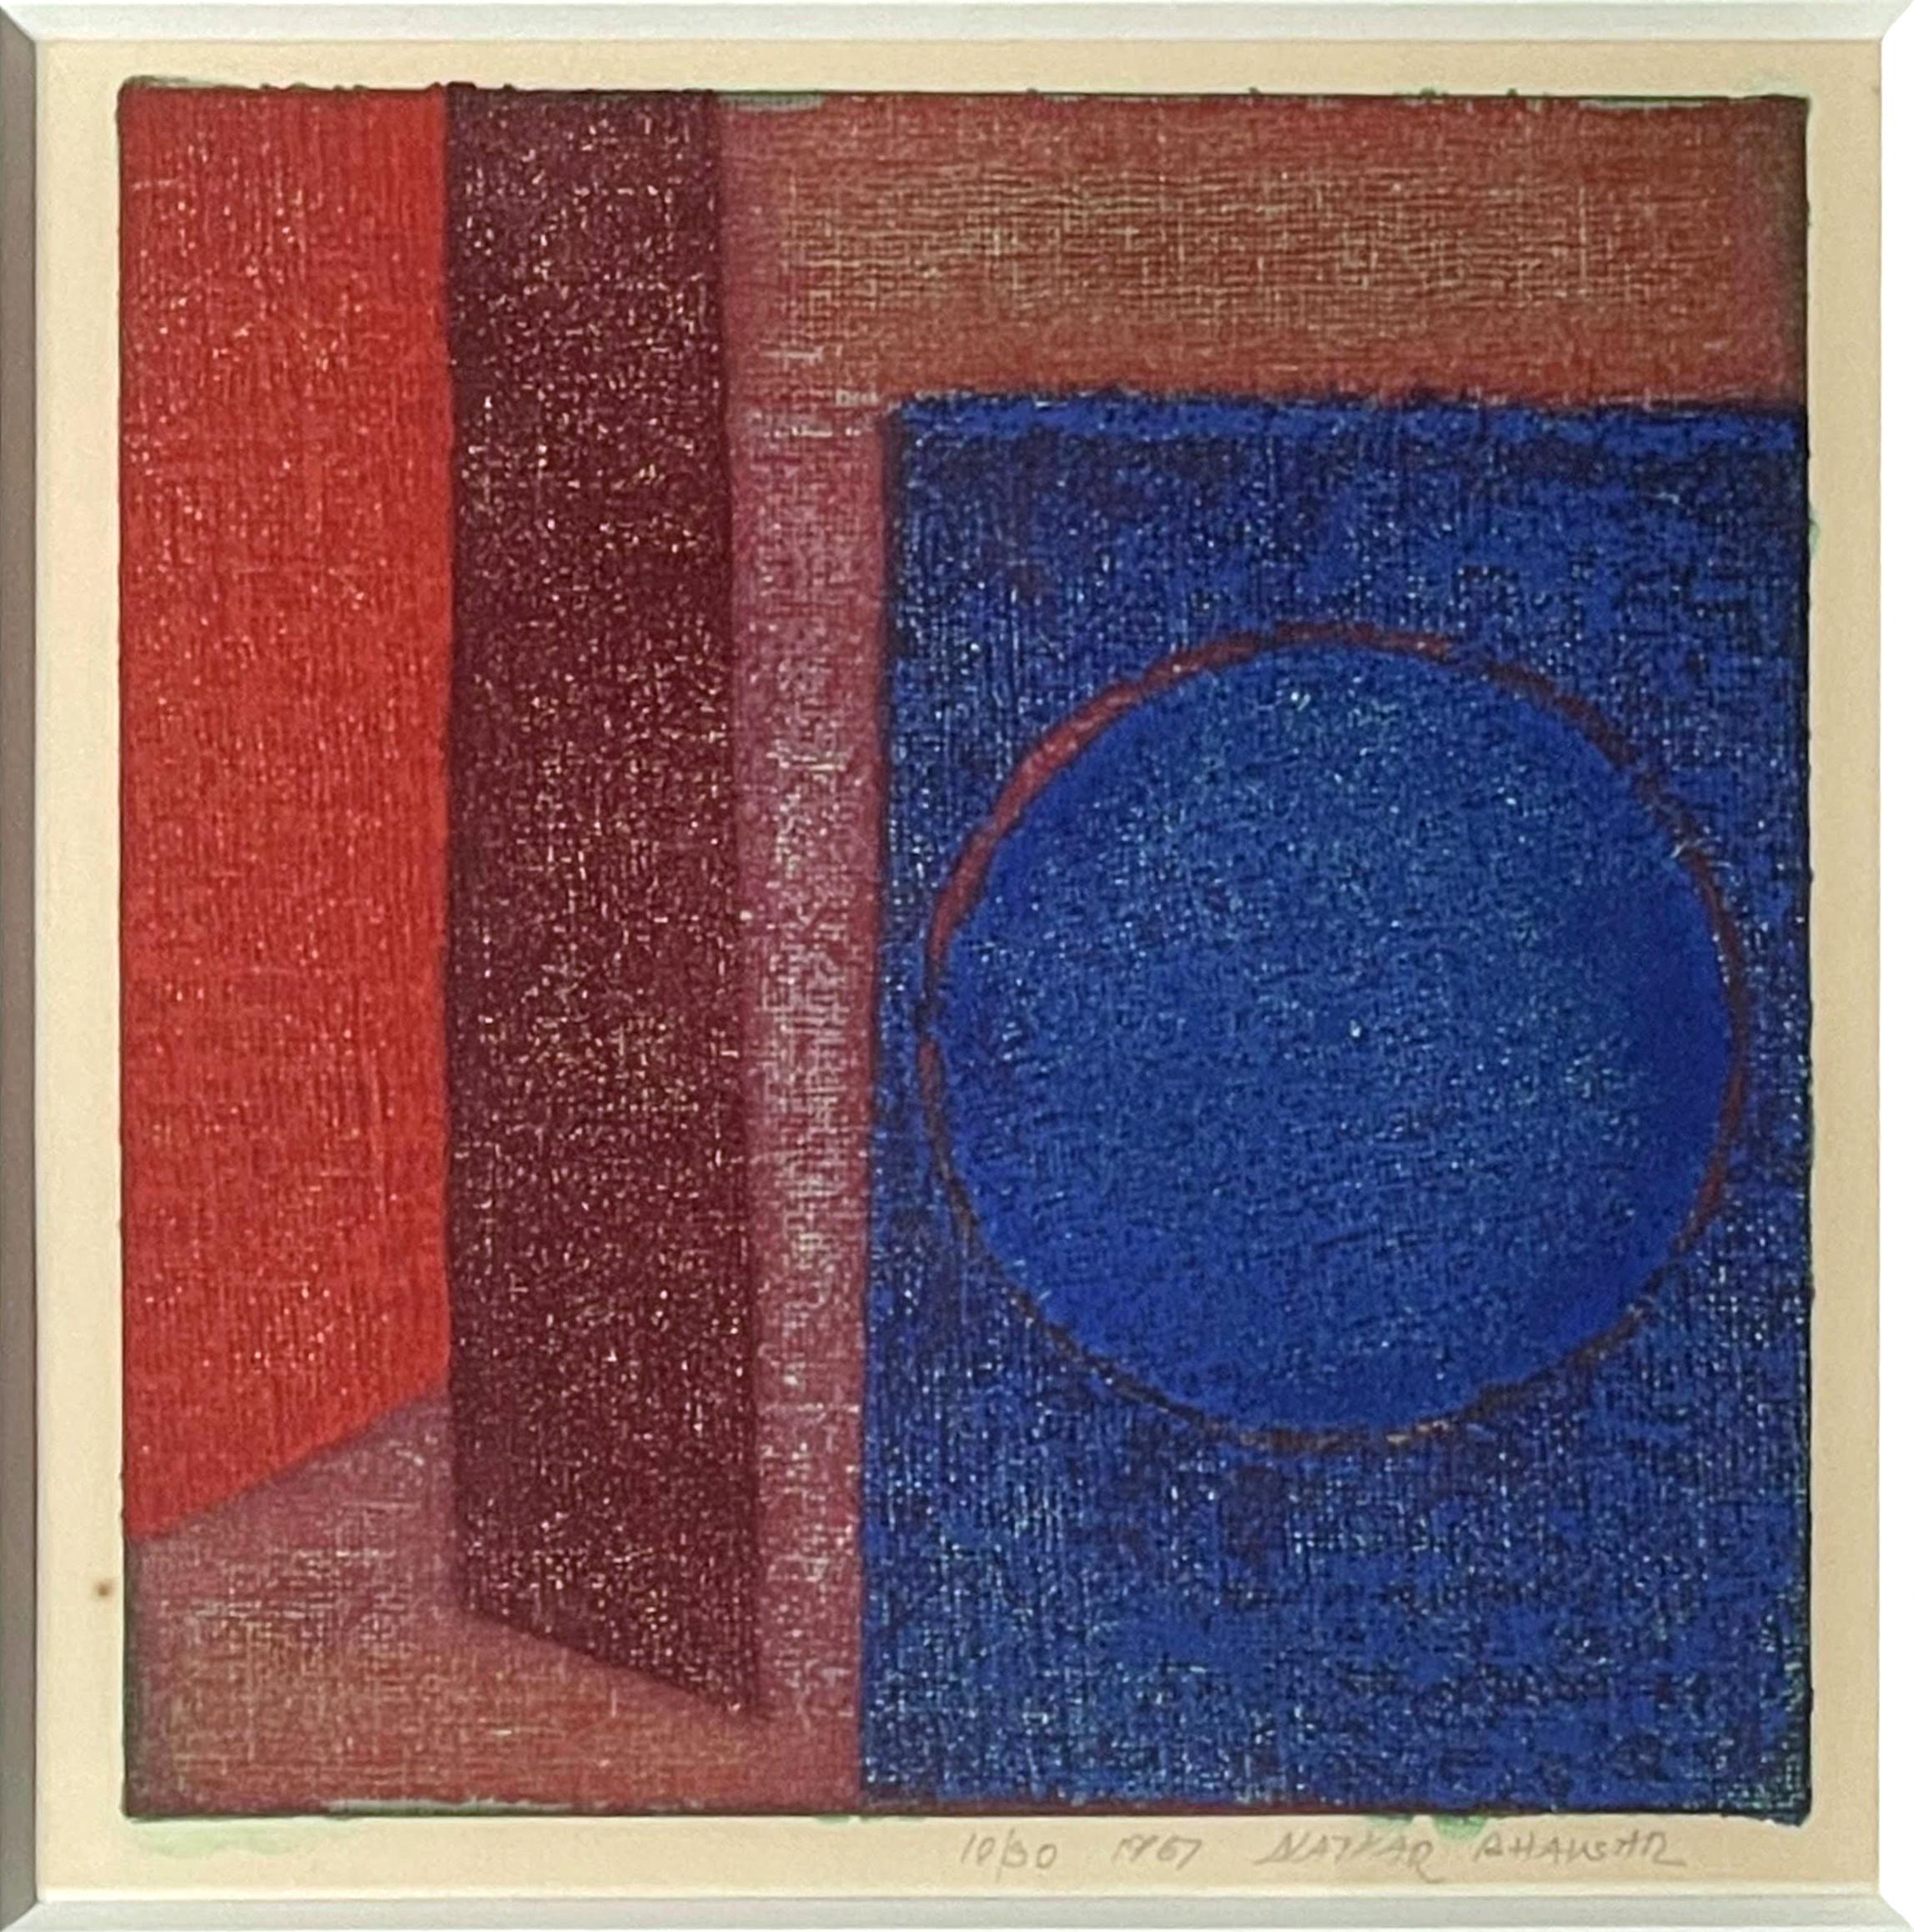 Untitled mid 1960s abstraction - Print by Natvar Bhavsar